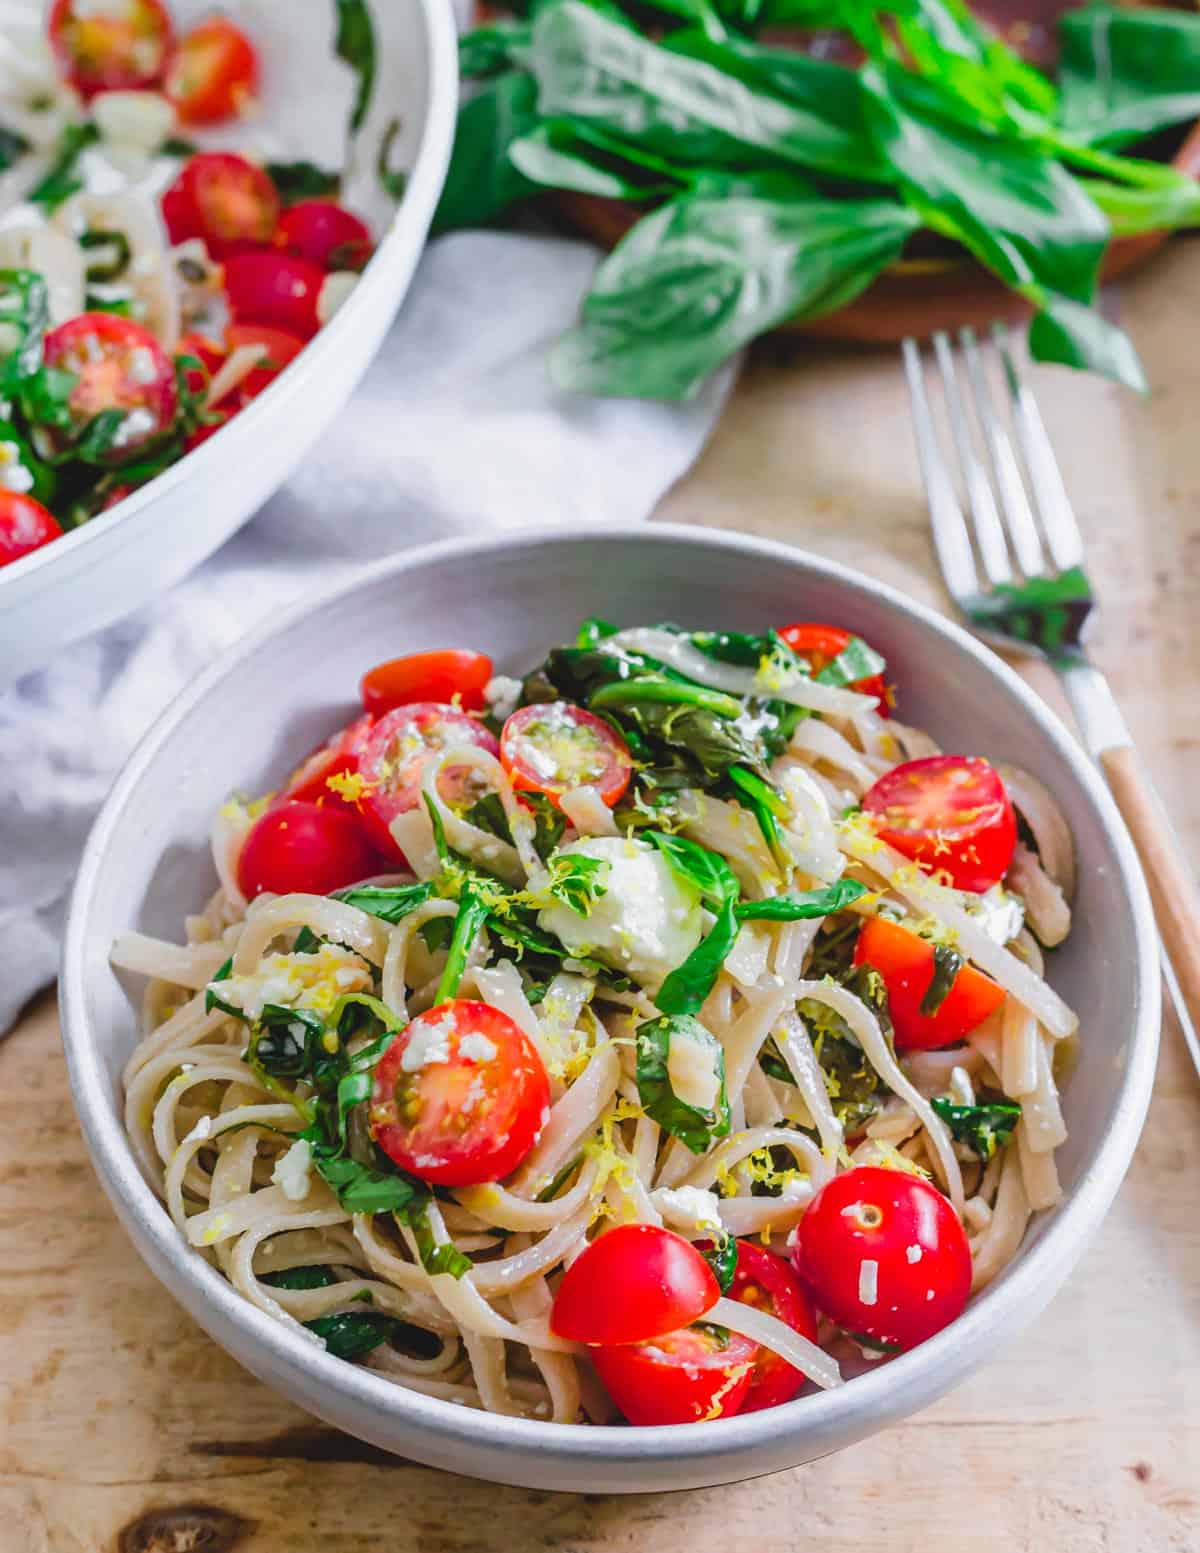 Lemon spinach feta pasta with cherry tomatoes in a white bowl on a wooden surface.